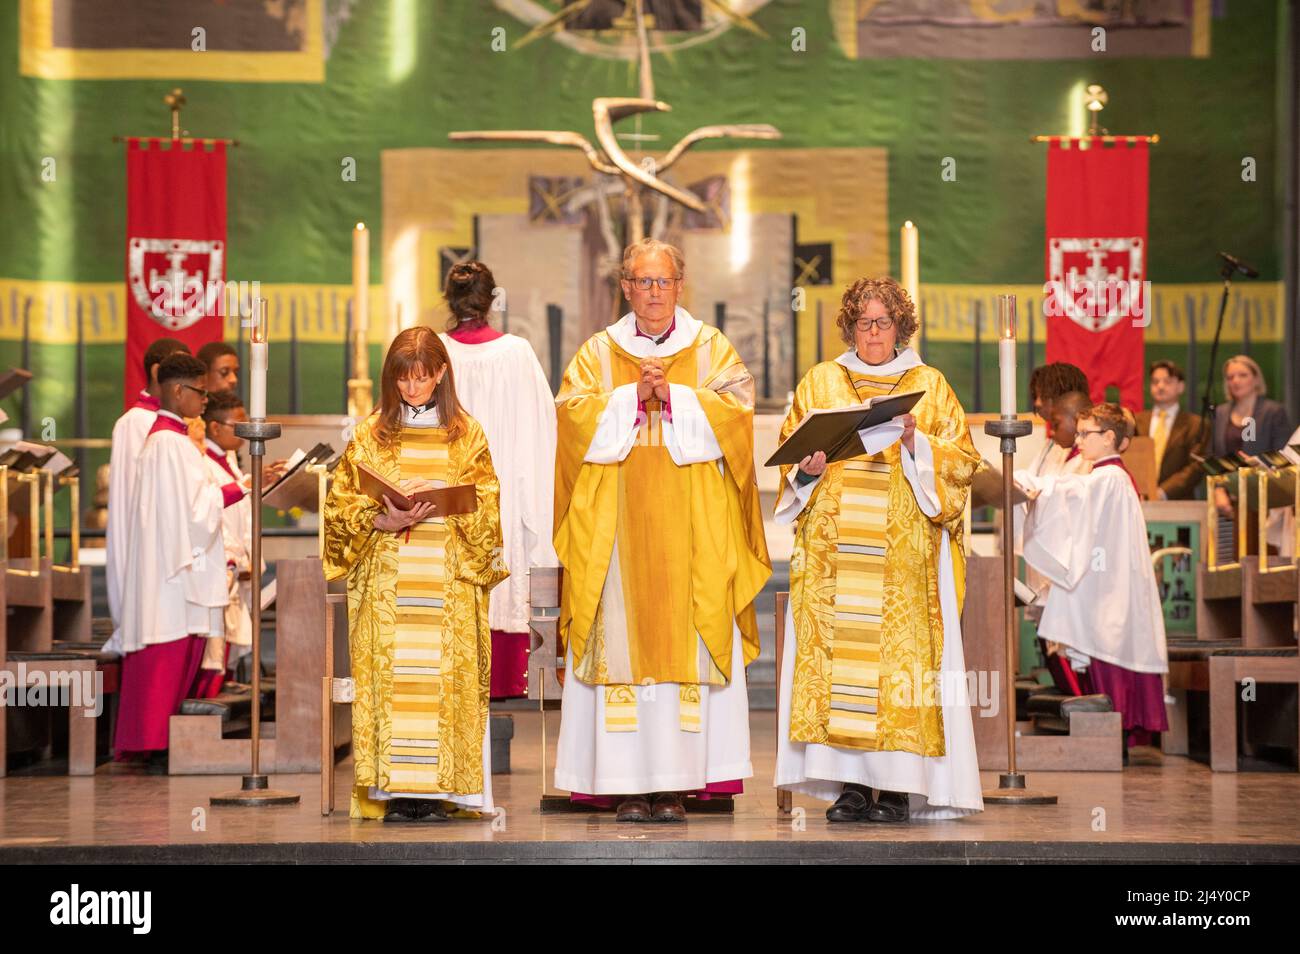 The Bishop of Coventry, Christopher Cocksworth in the centre. Taken during Easter Mass 2022 Stock Photo